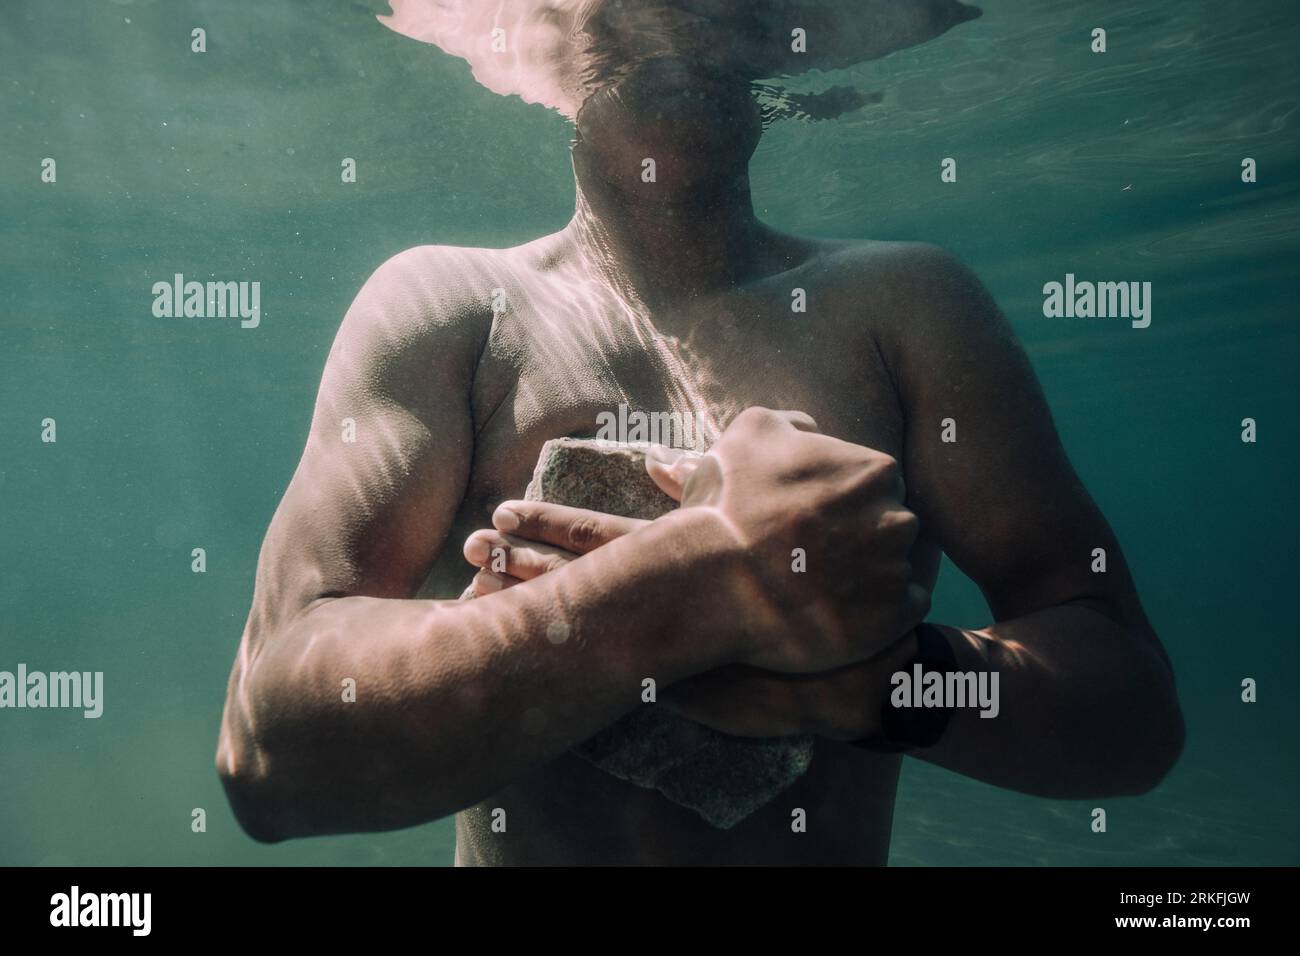 A young male holds a cement brick underwater. Stock Photo